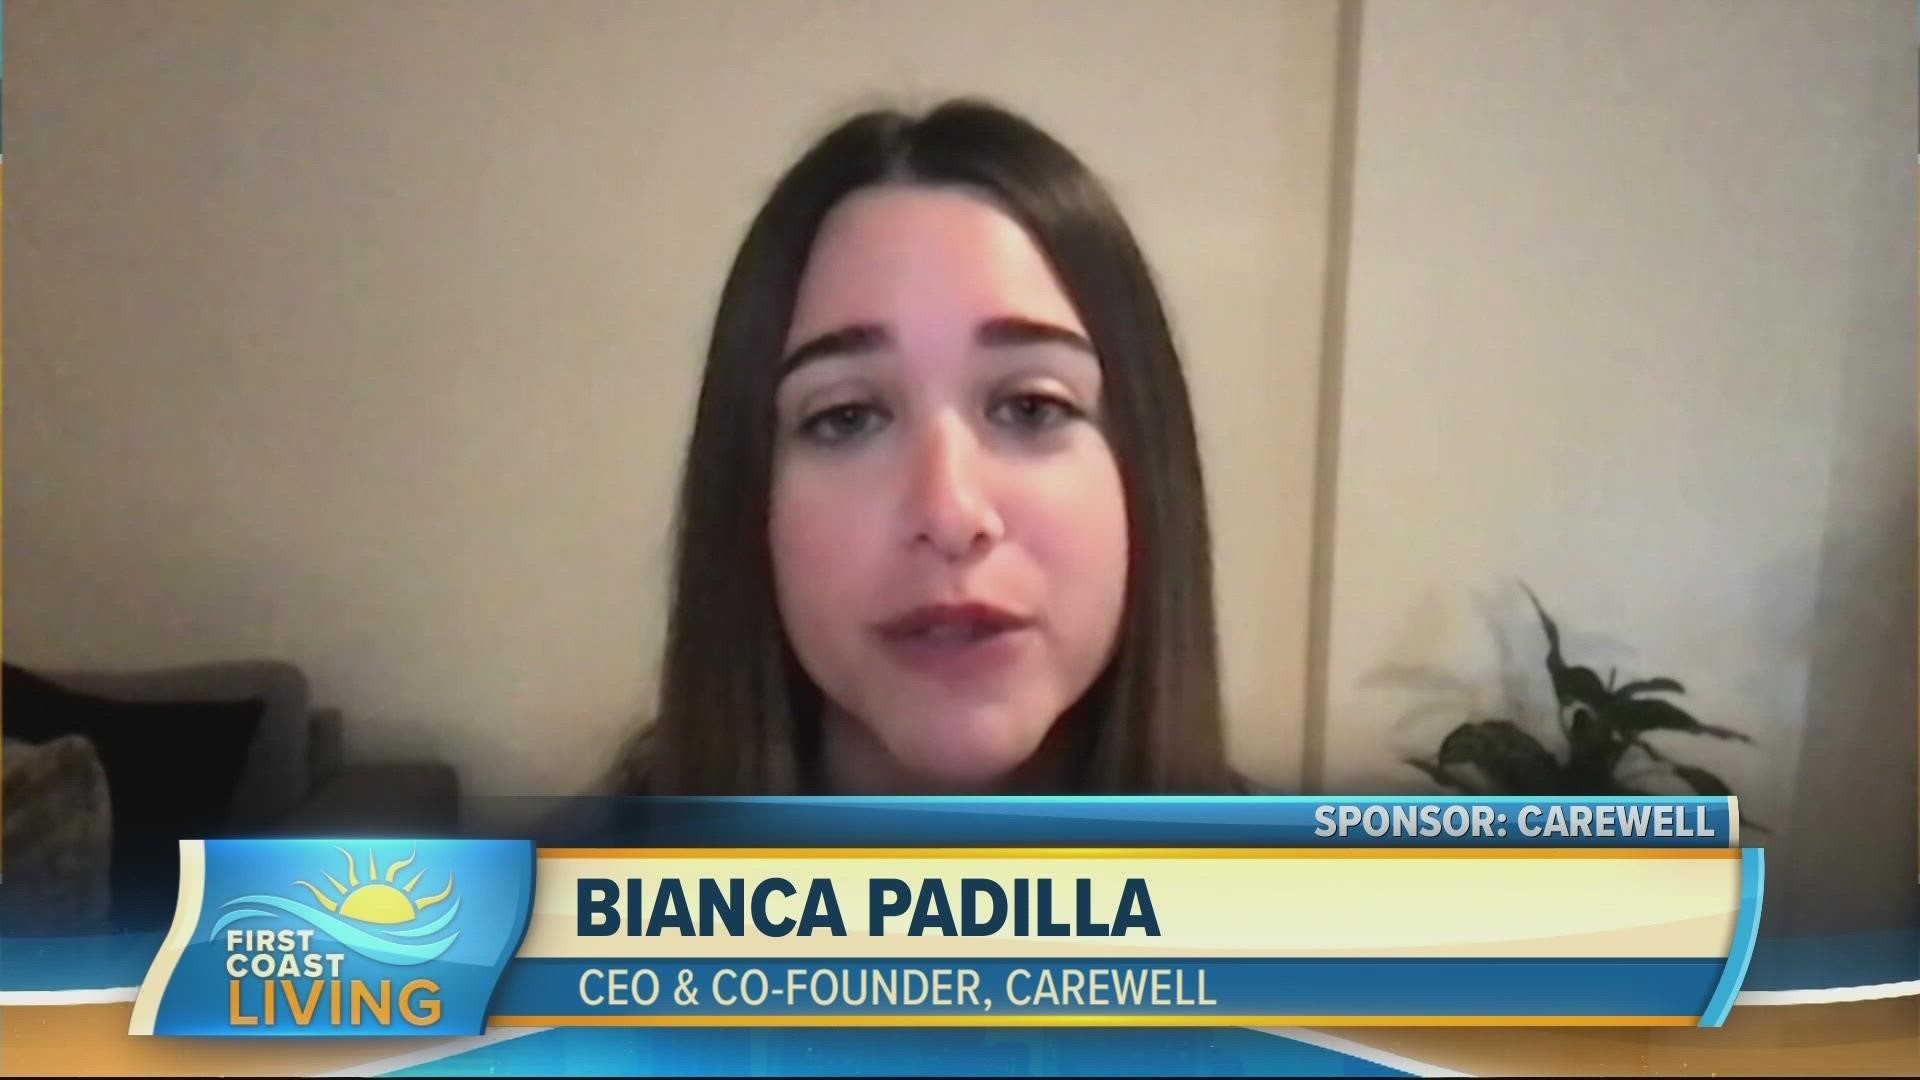 Bianca Padilla the CEO and Co-Founder of Carewell is on a mission to improve the lives of caregivers and their loved ones by providing support they need.